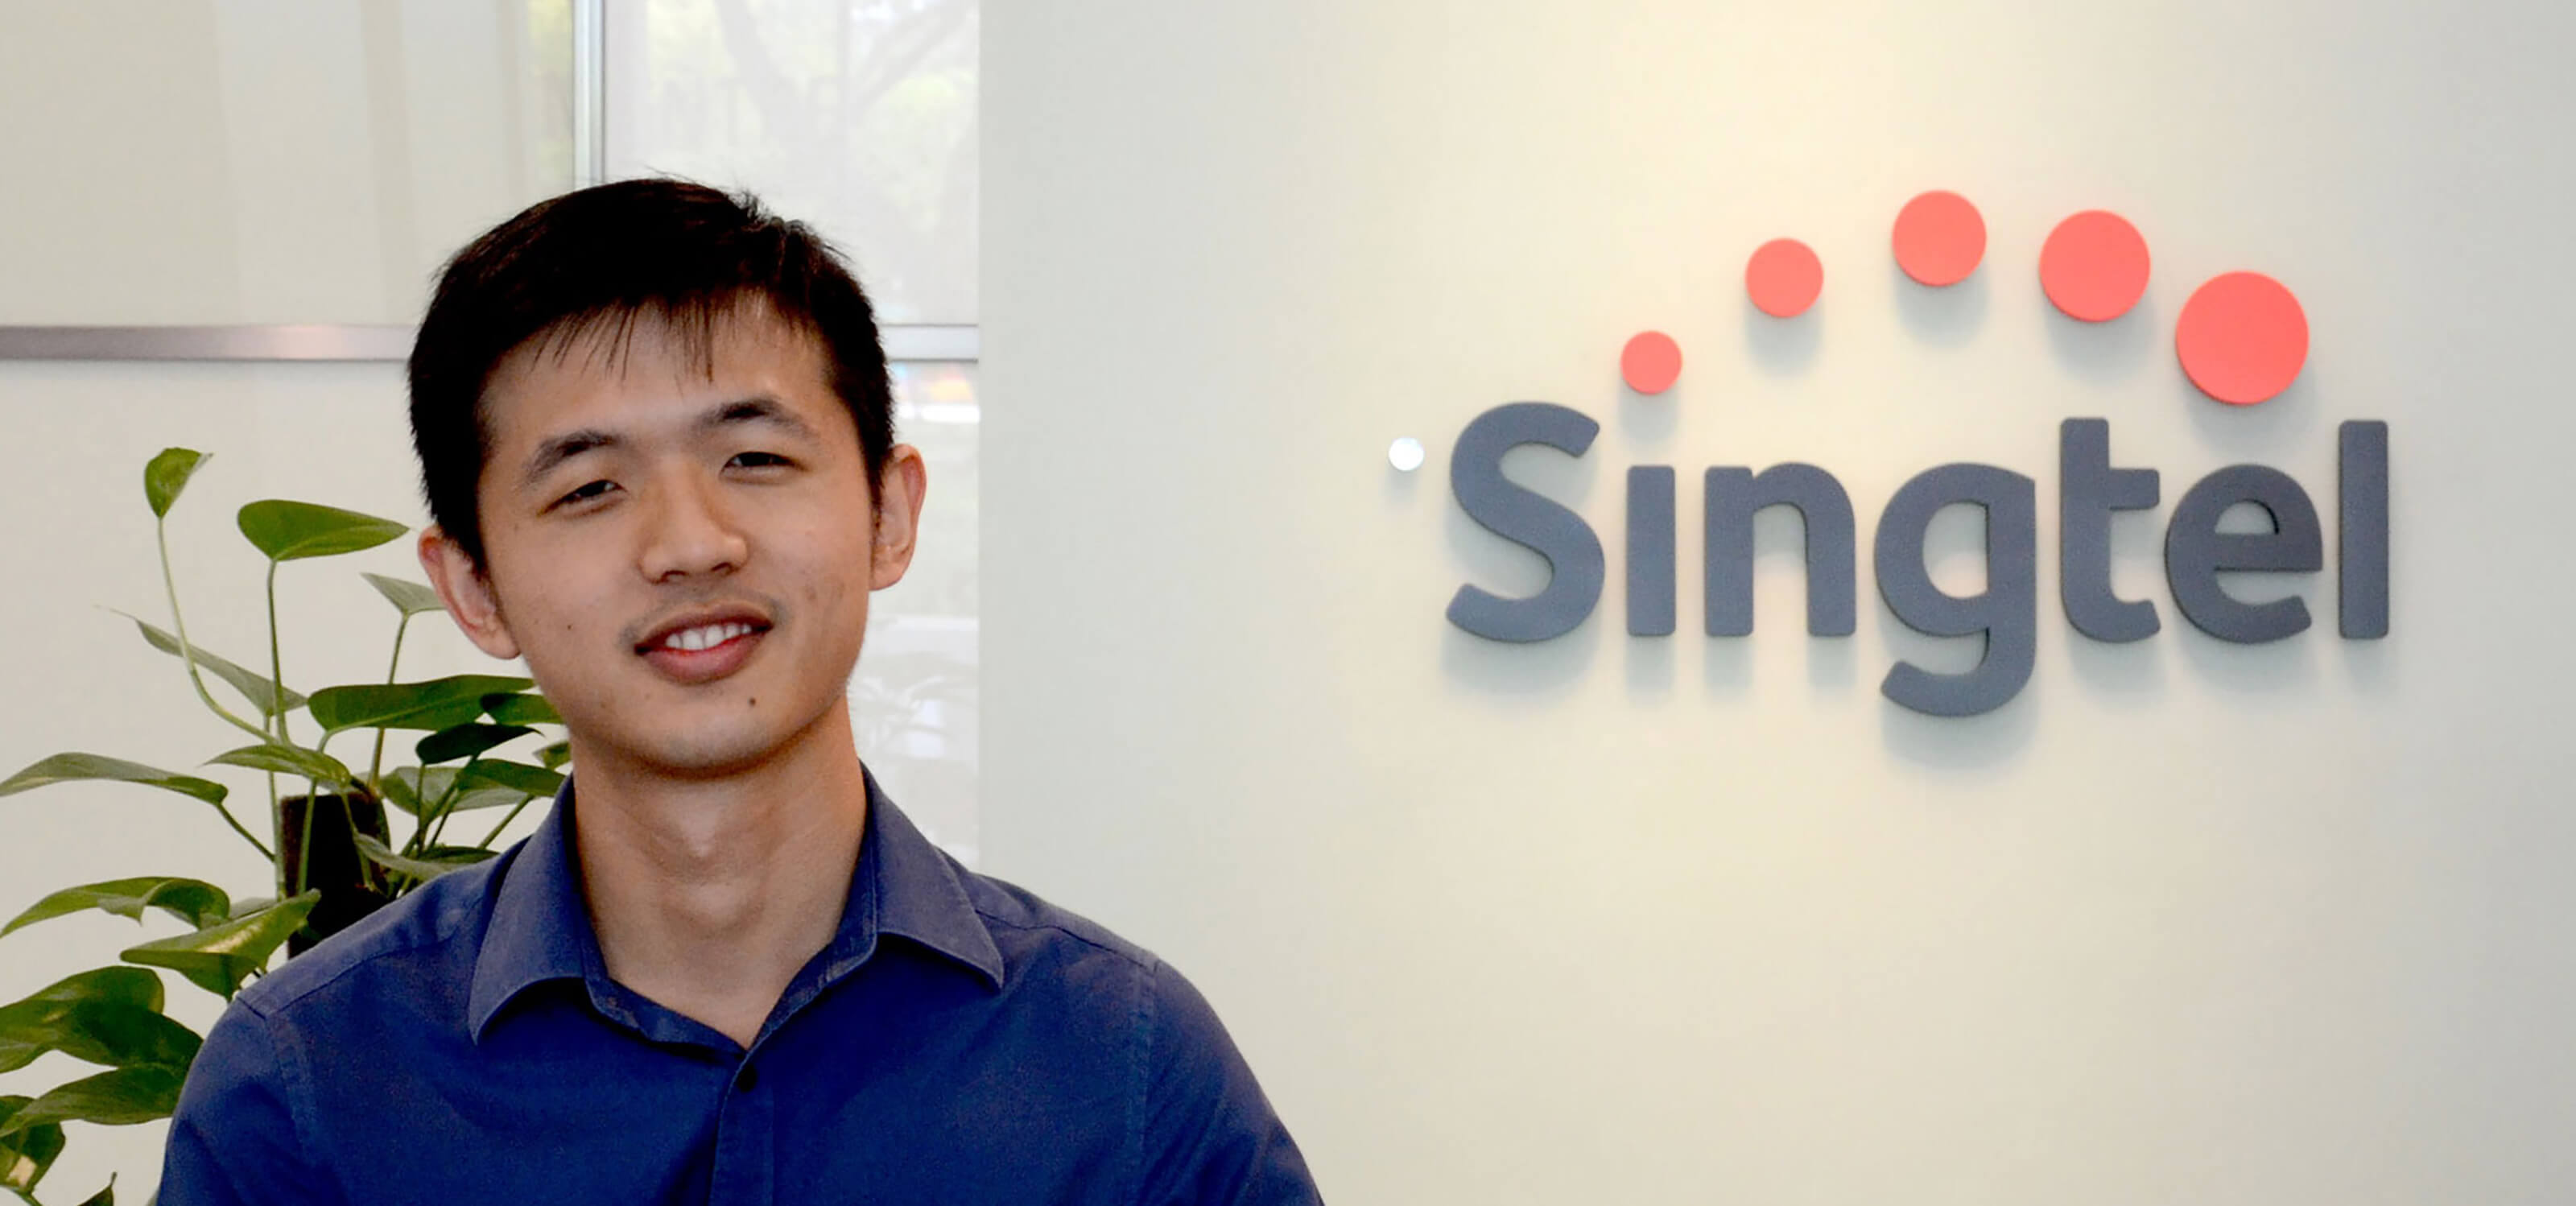 DigiPen (Singapore) BA in Game Design alumnus Daryl Bong poses in front of the Singtel logo